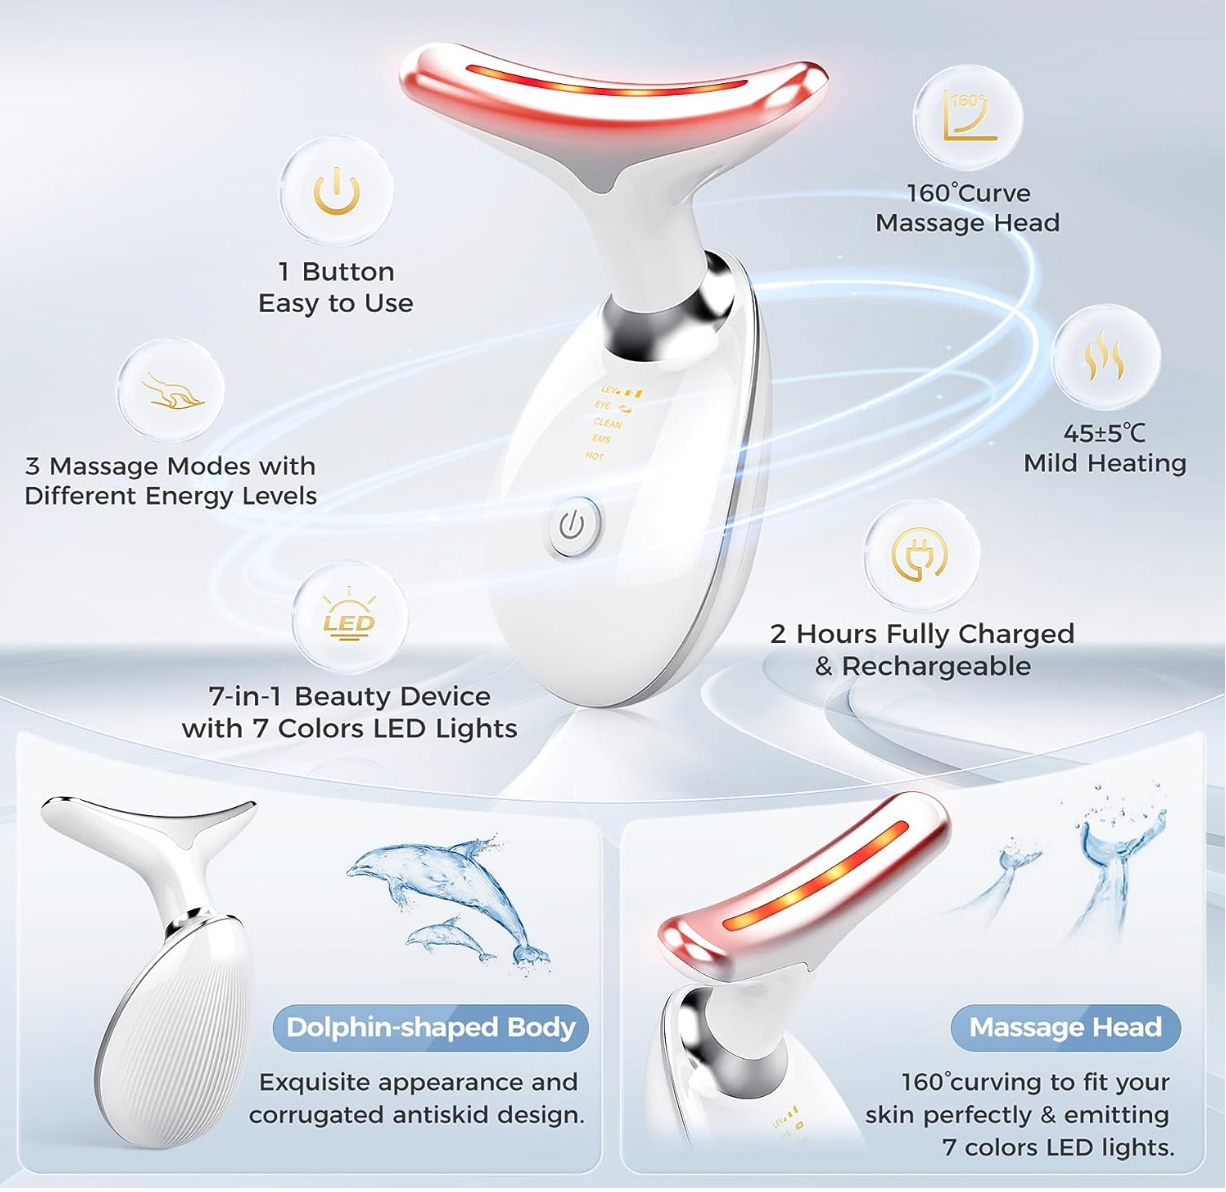 LED PHOTON THERAPY & MASSAGER